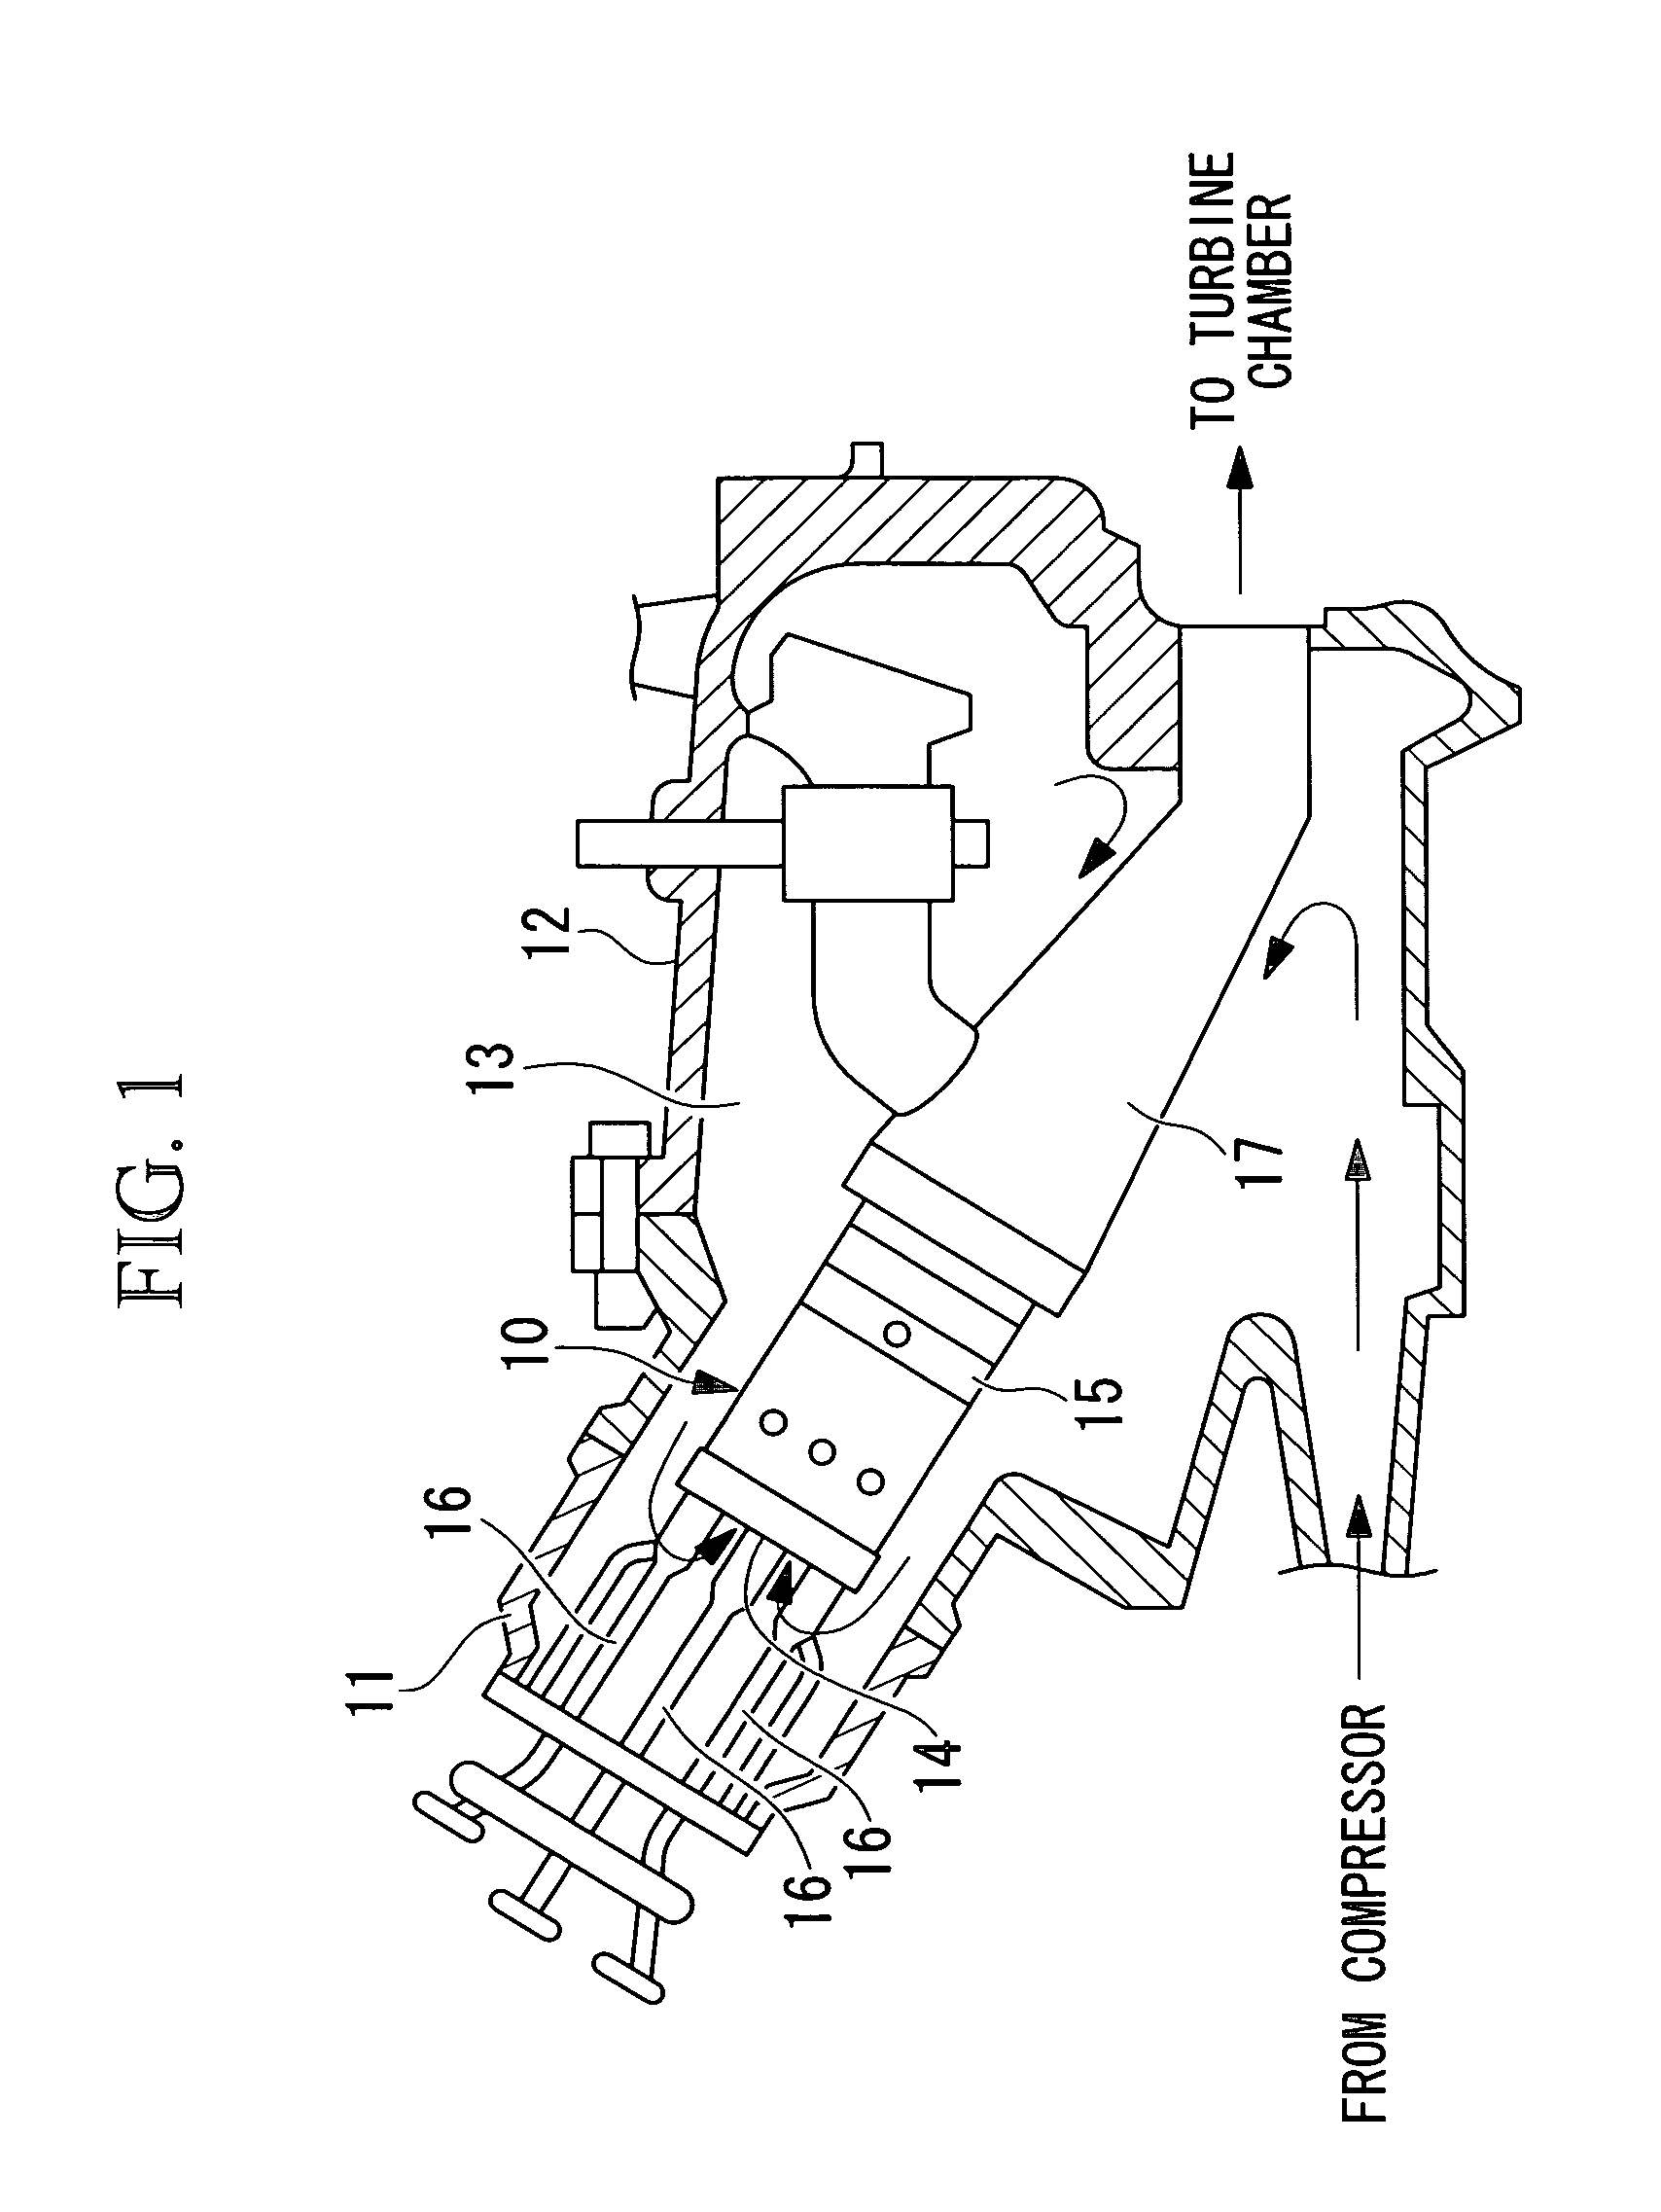 Premixed combustion burner for gas turbine